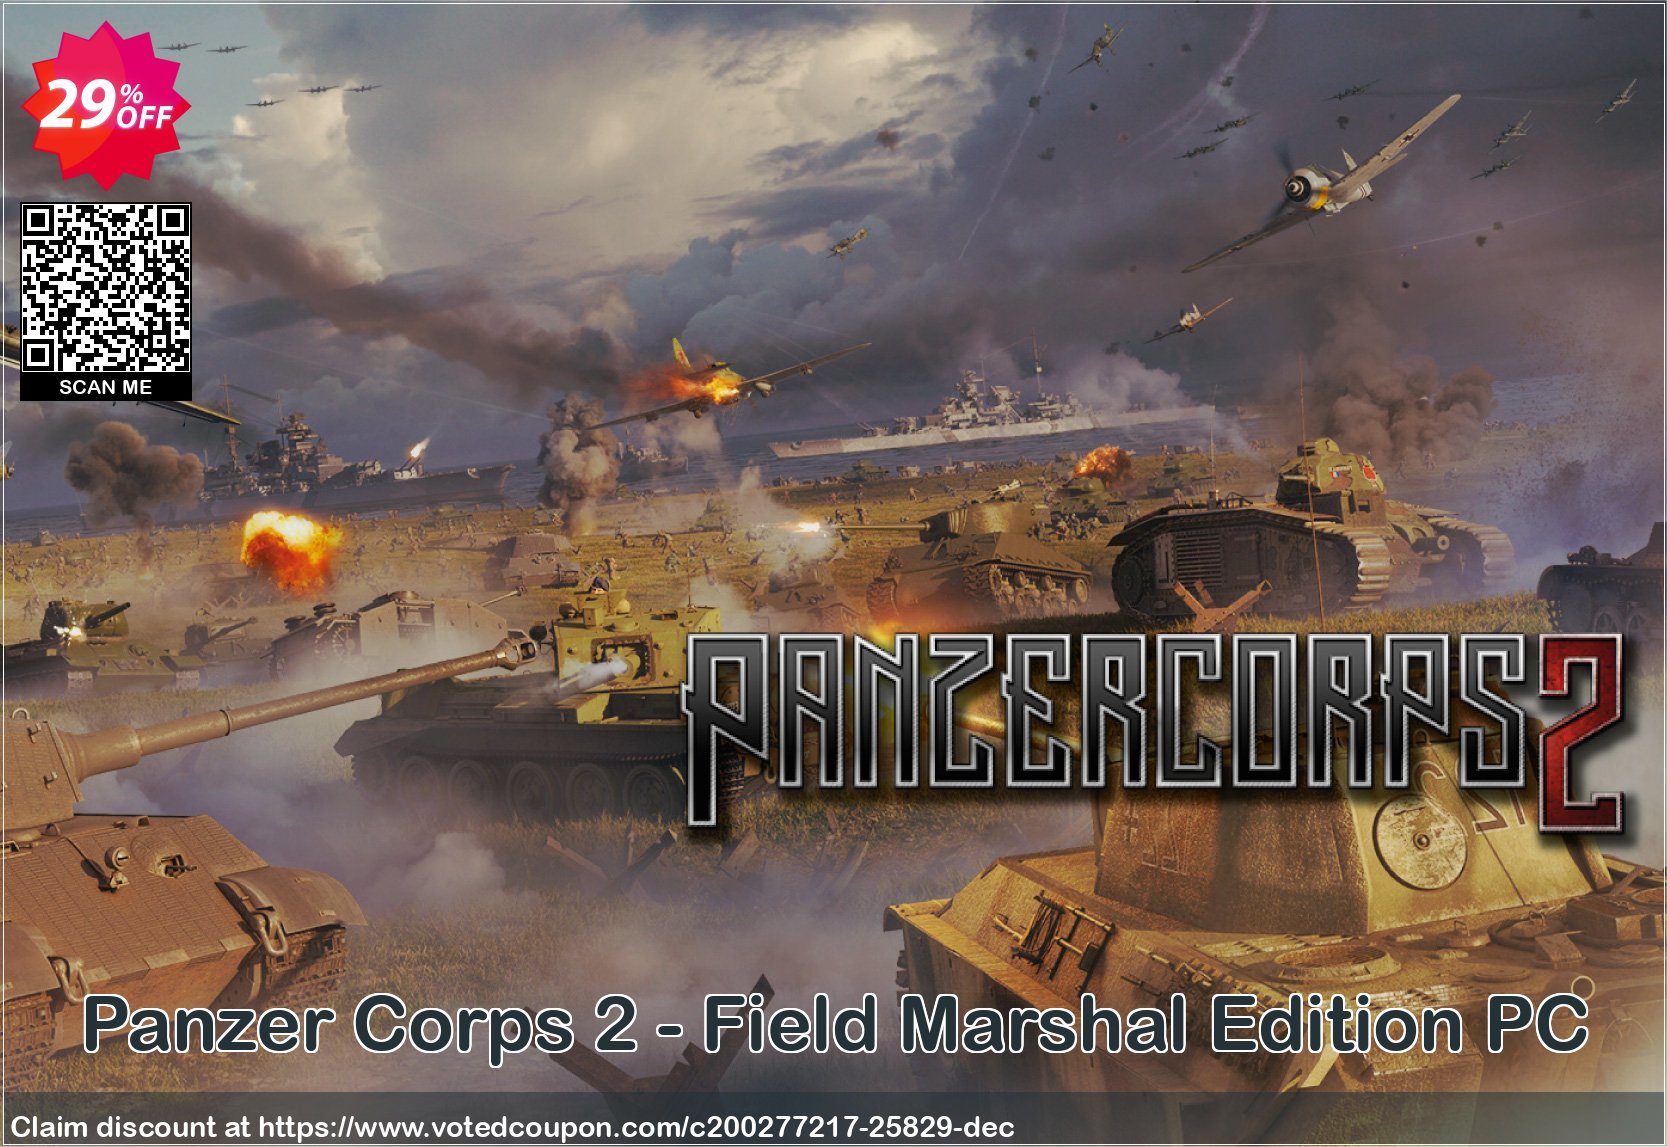 Panzer Corps 2 - Field Marshal Edition PC Coupon, discount Panzer Corps 2 - Field Marshal Edition PC Deal. Promotion: Panzer Corps 2 - Field Marshal Edition PC Exclusive offer 